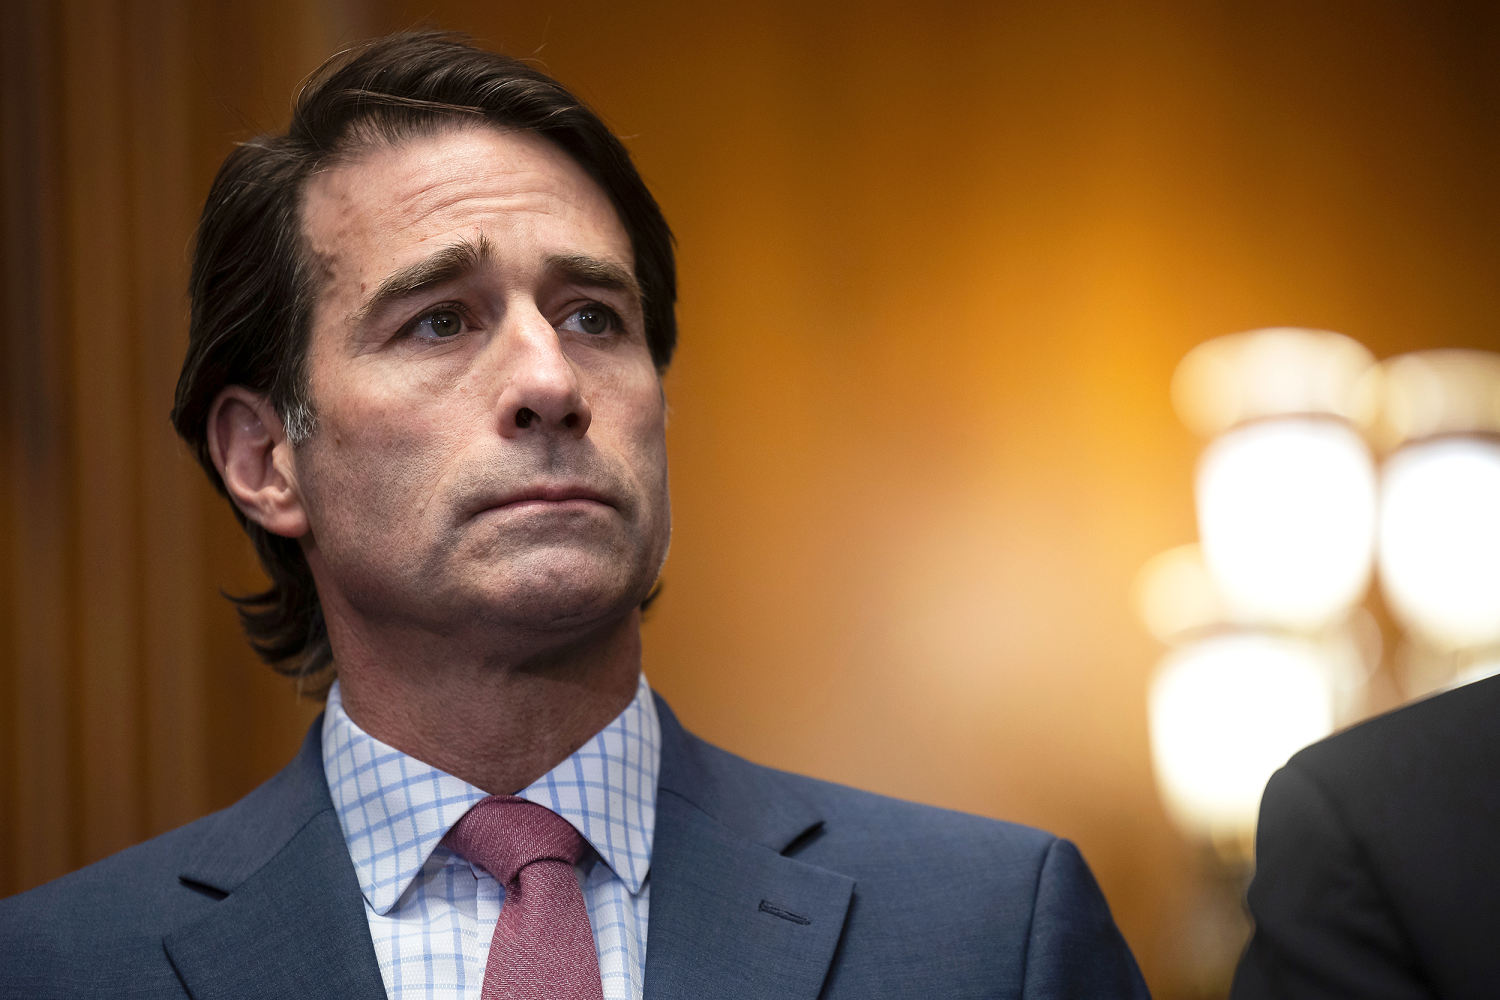 Louisiana GOP Rep. Garret Graves won't seek re-election after Supreme Court ruling on redistricting